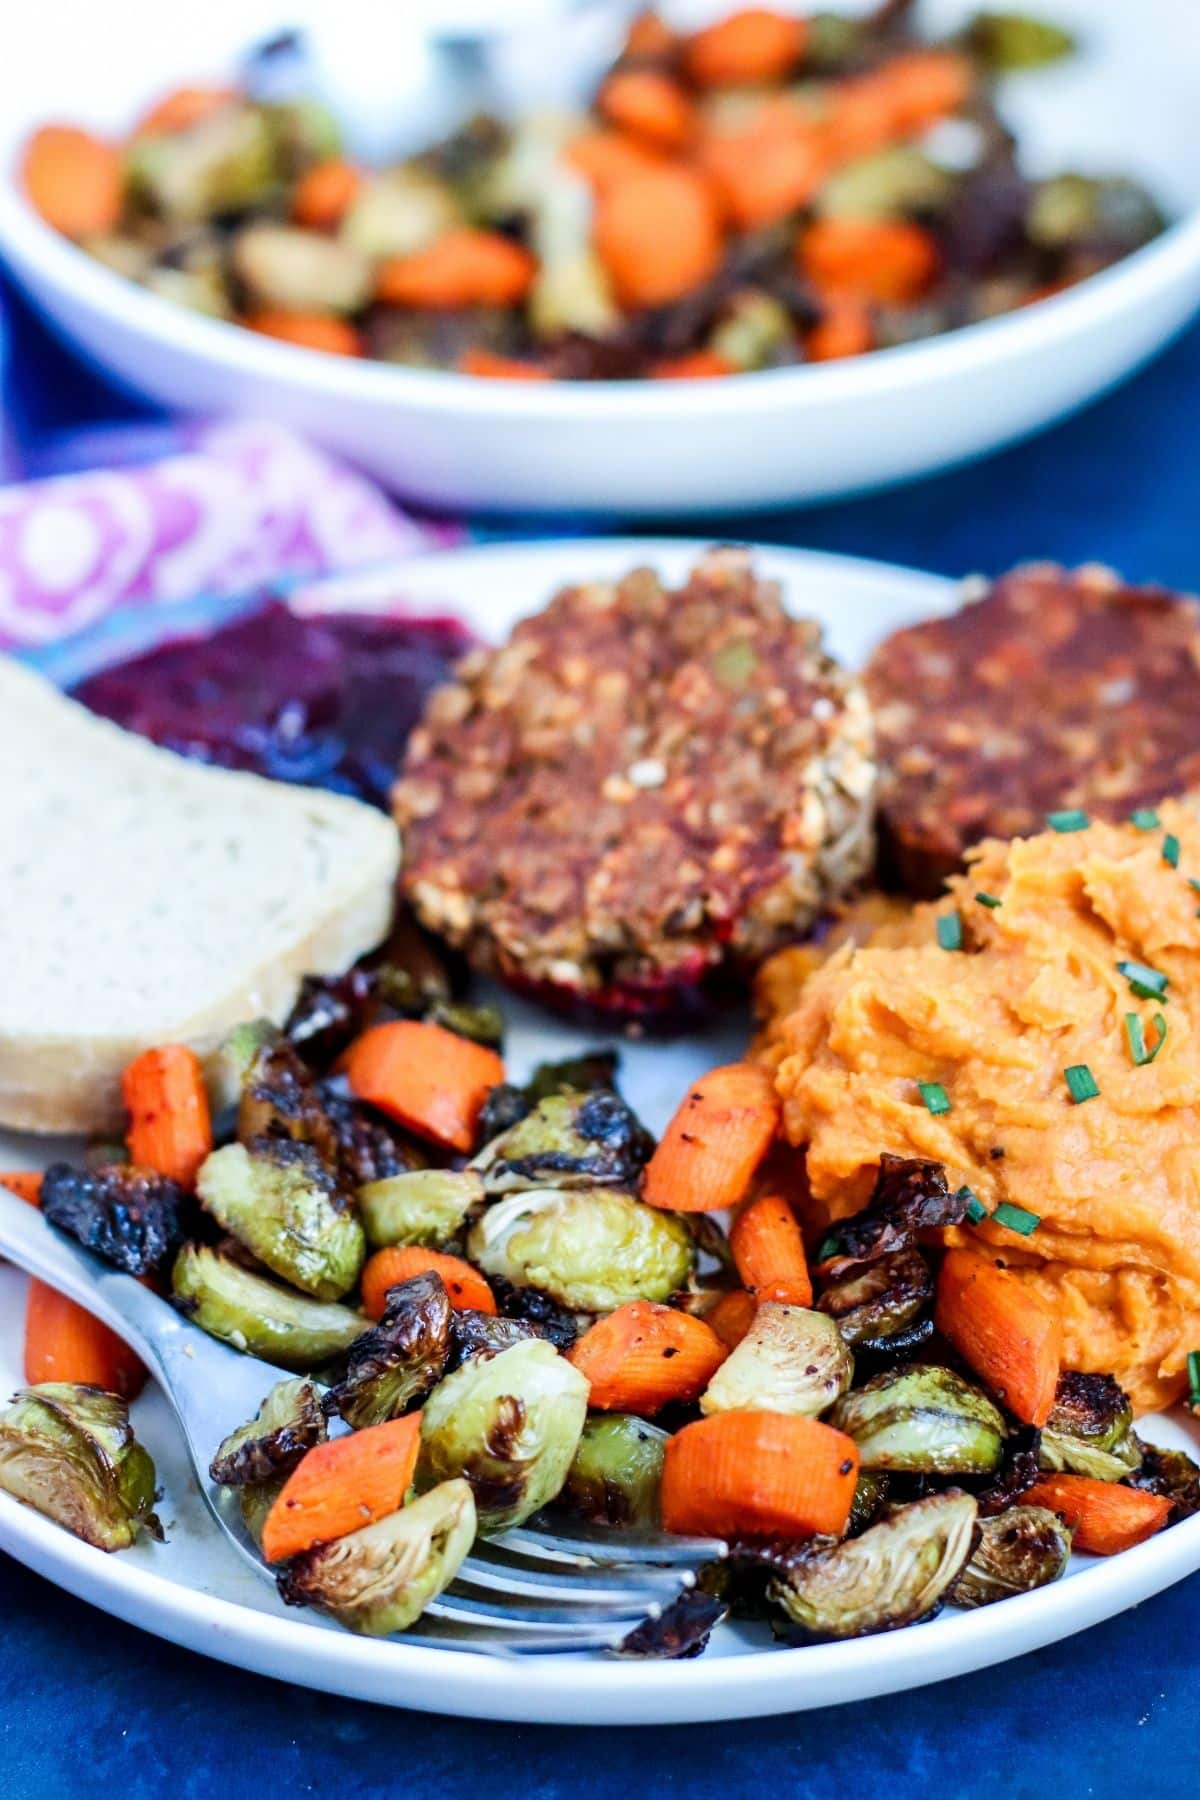 Roasted Brussels sprouts and carrots on a dinner plate with mashed sweet potatoes, lentil meatloaf muffins, cranberry sauce, and bread with bowl of vegetables in the background.